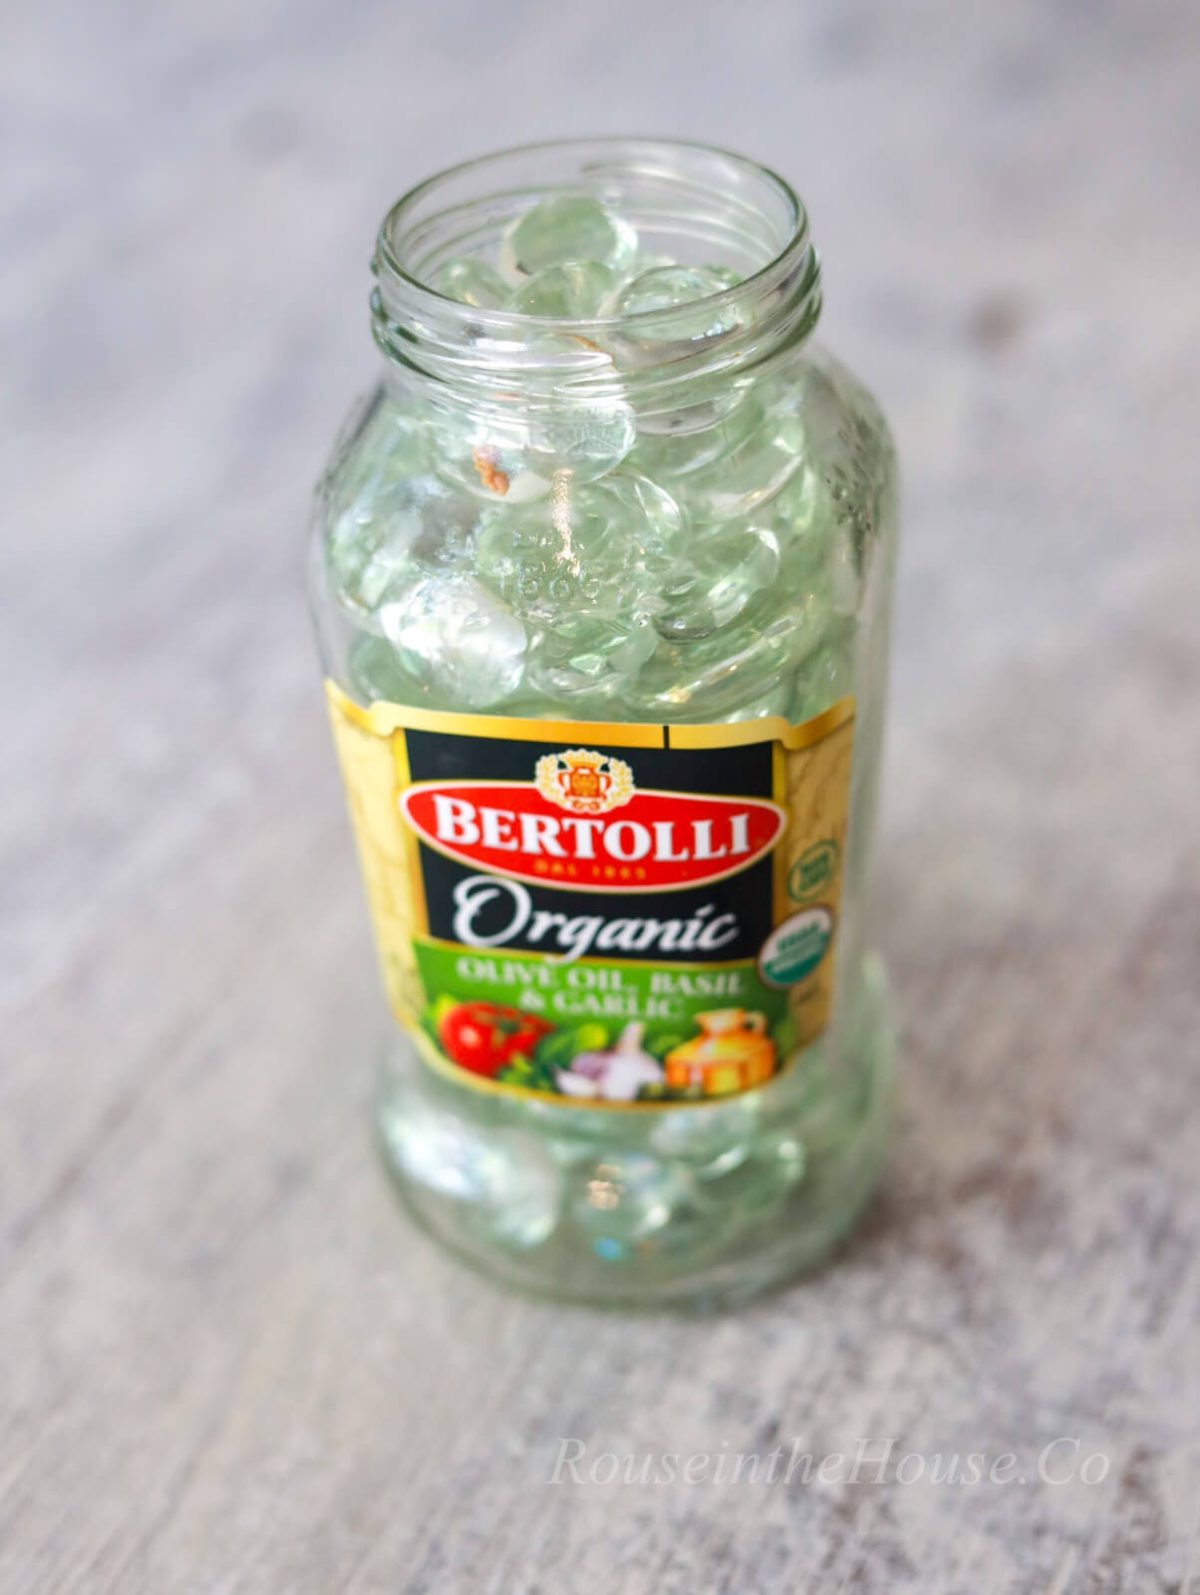 A Bertolli sauce jar that's been cleaned to repurpose for DIYing an etched glass flower vase.